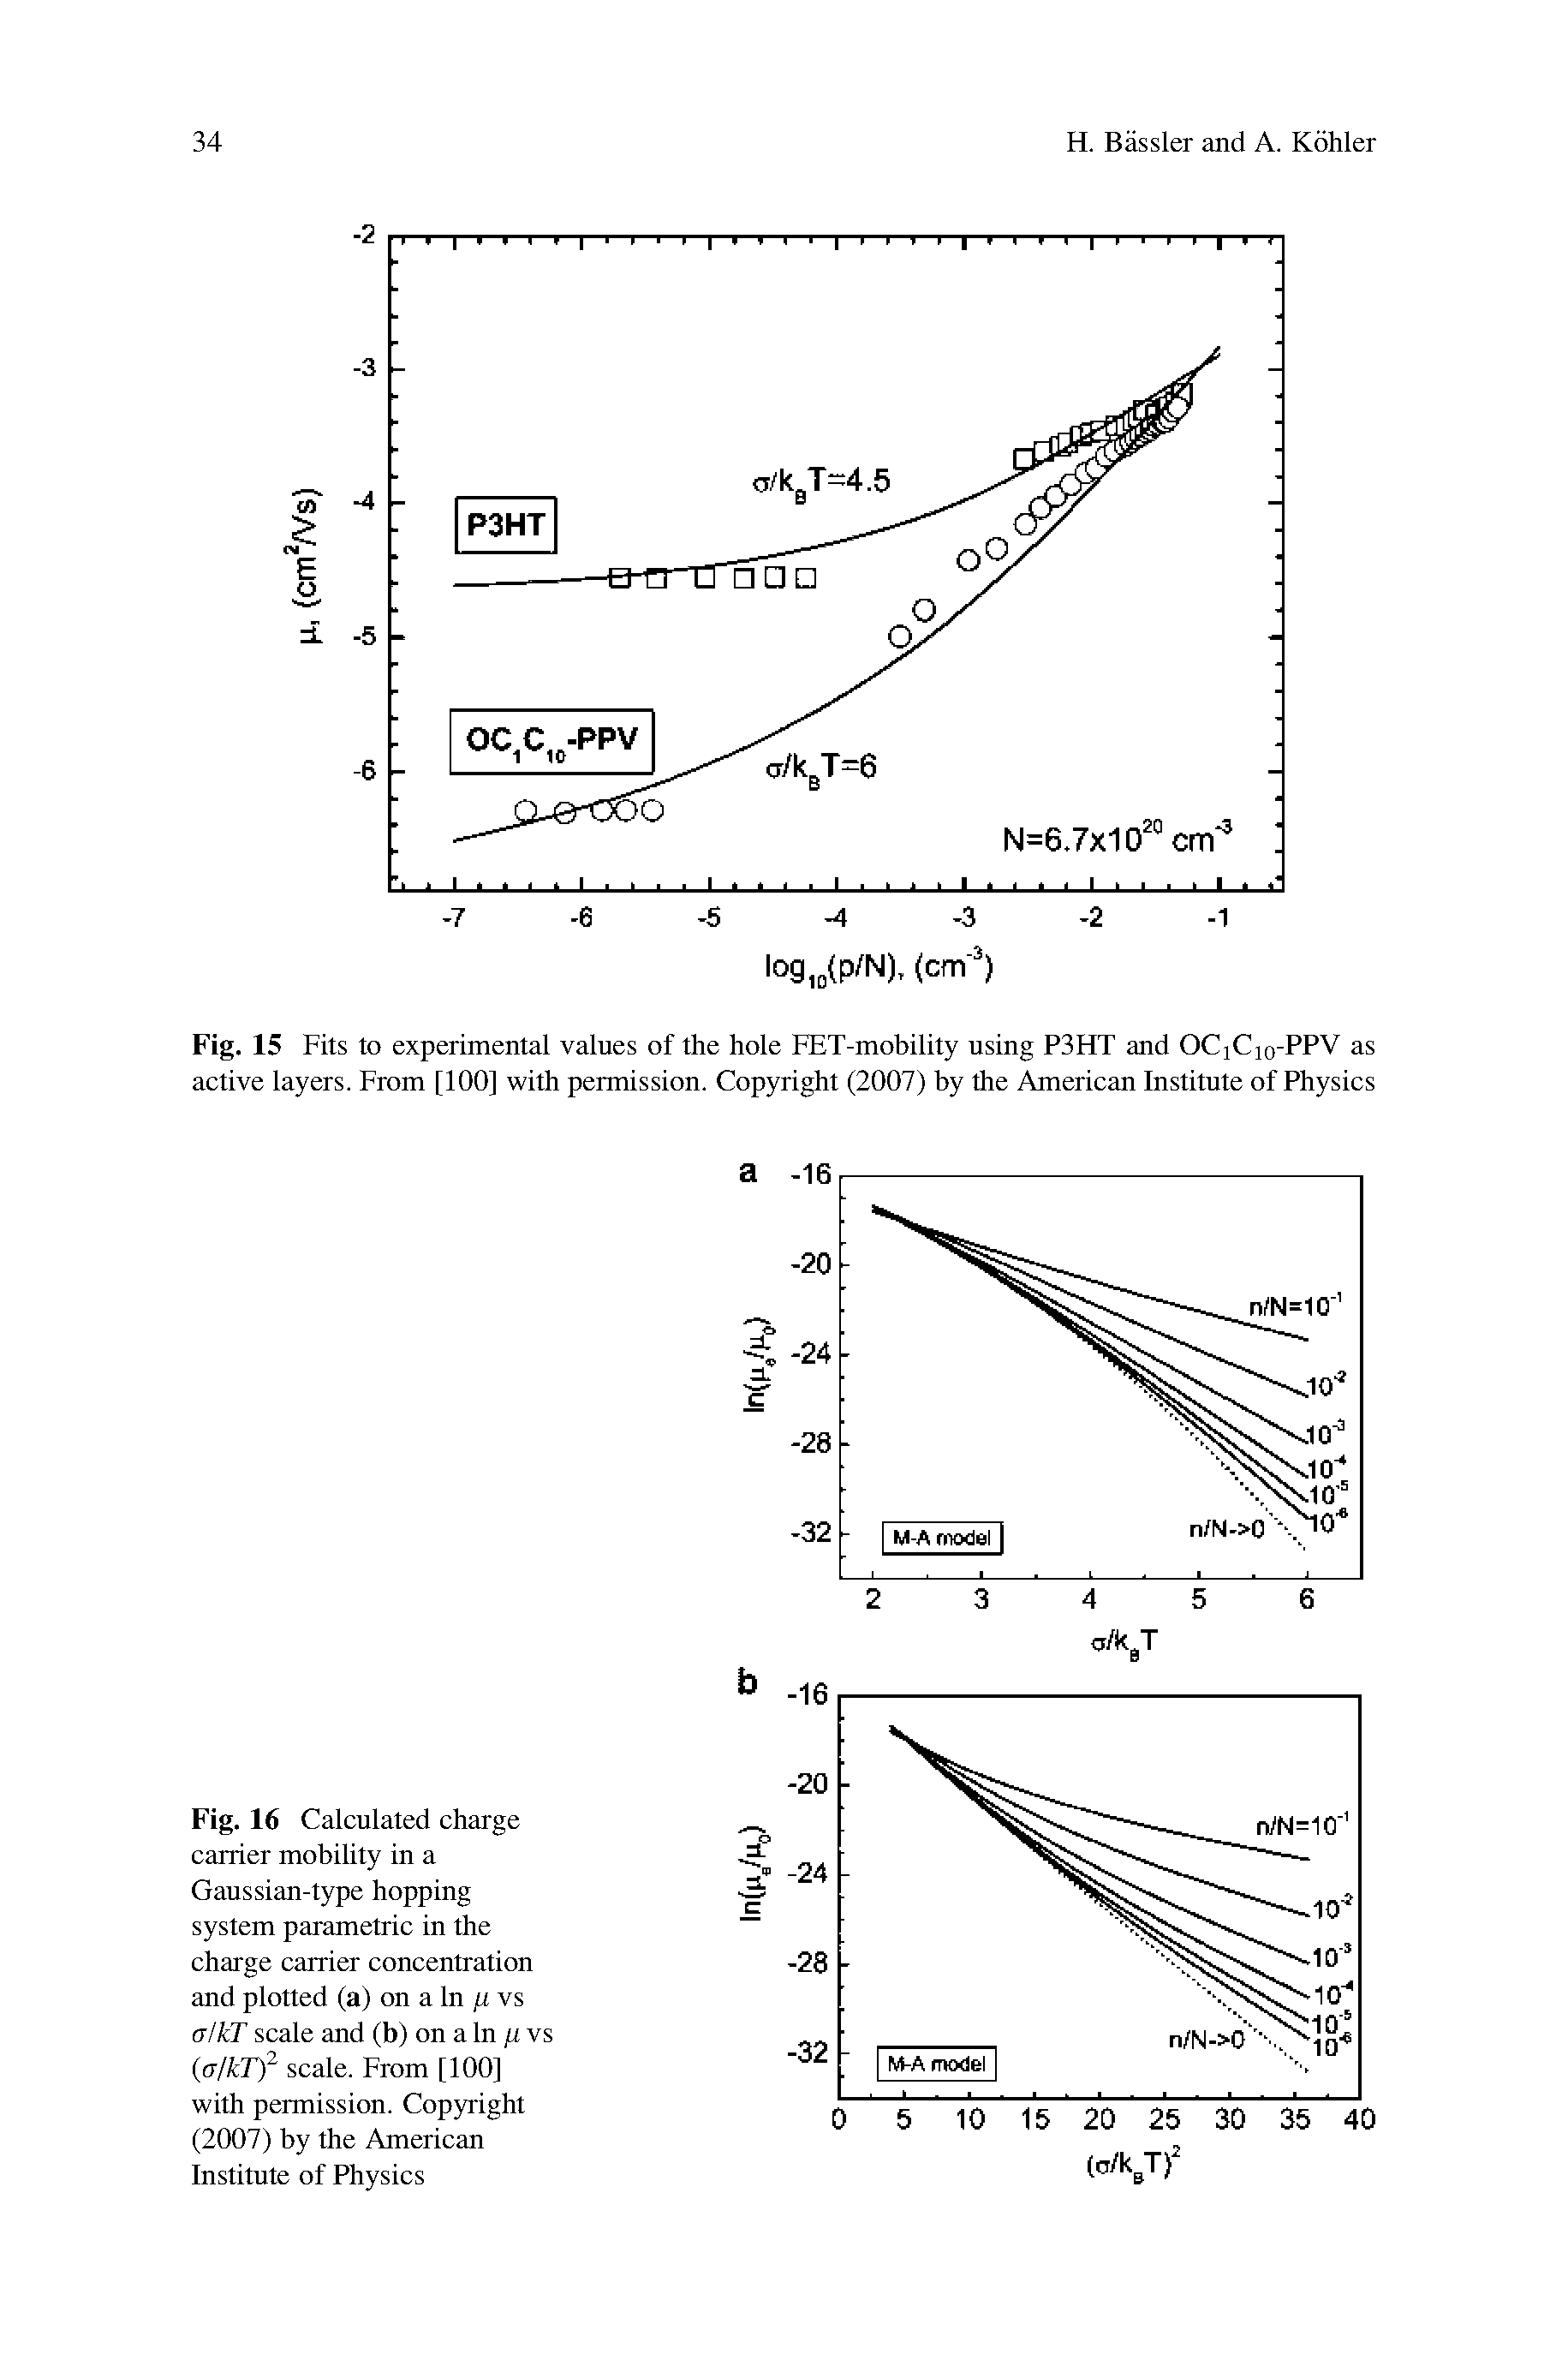 Fig. 16 Calculated charge carrier mobility in a Gaussian-type hopping system parametric in the charge carrier concentration and plotted (a) on a In U vs aIkT scale and (b) on a In U vs (alkTf scale. From [100] with permission. Copyright (2007) by the American Institute of Physics...